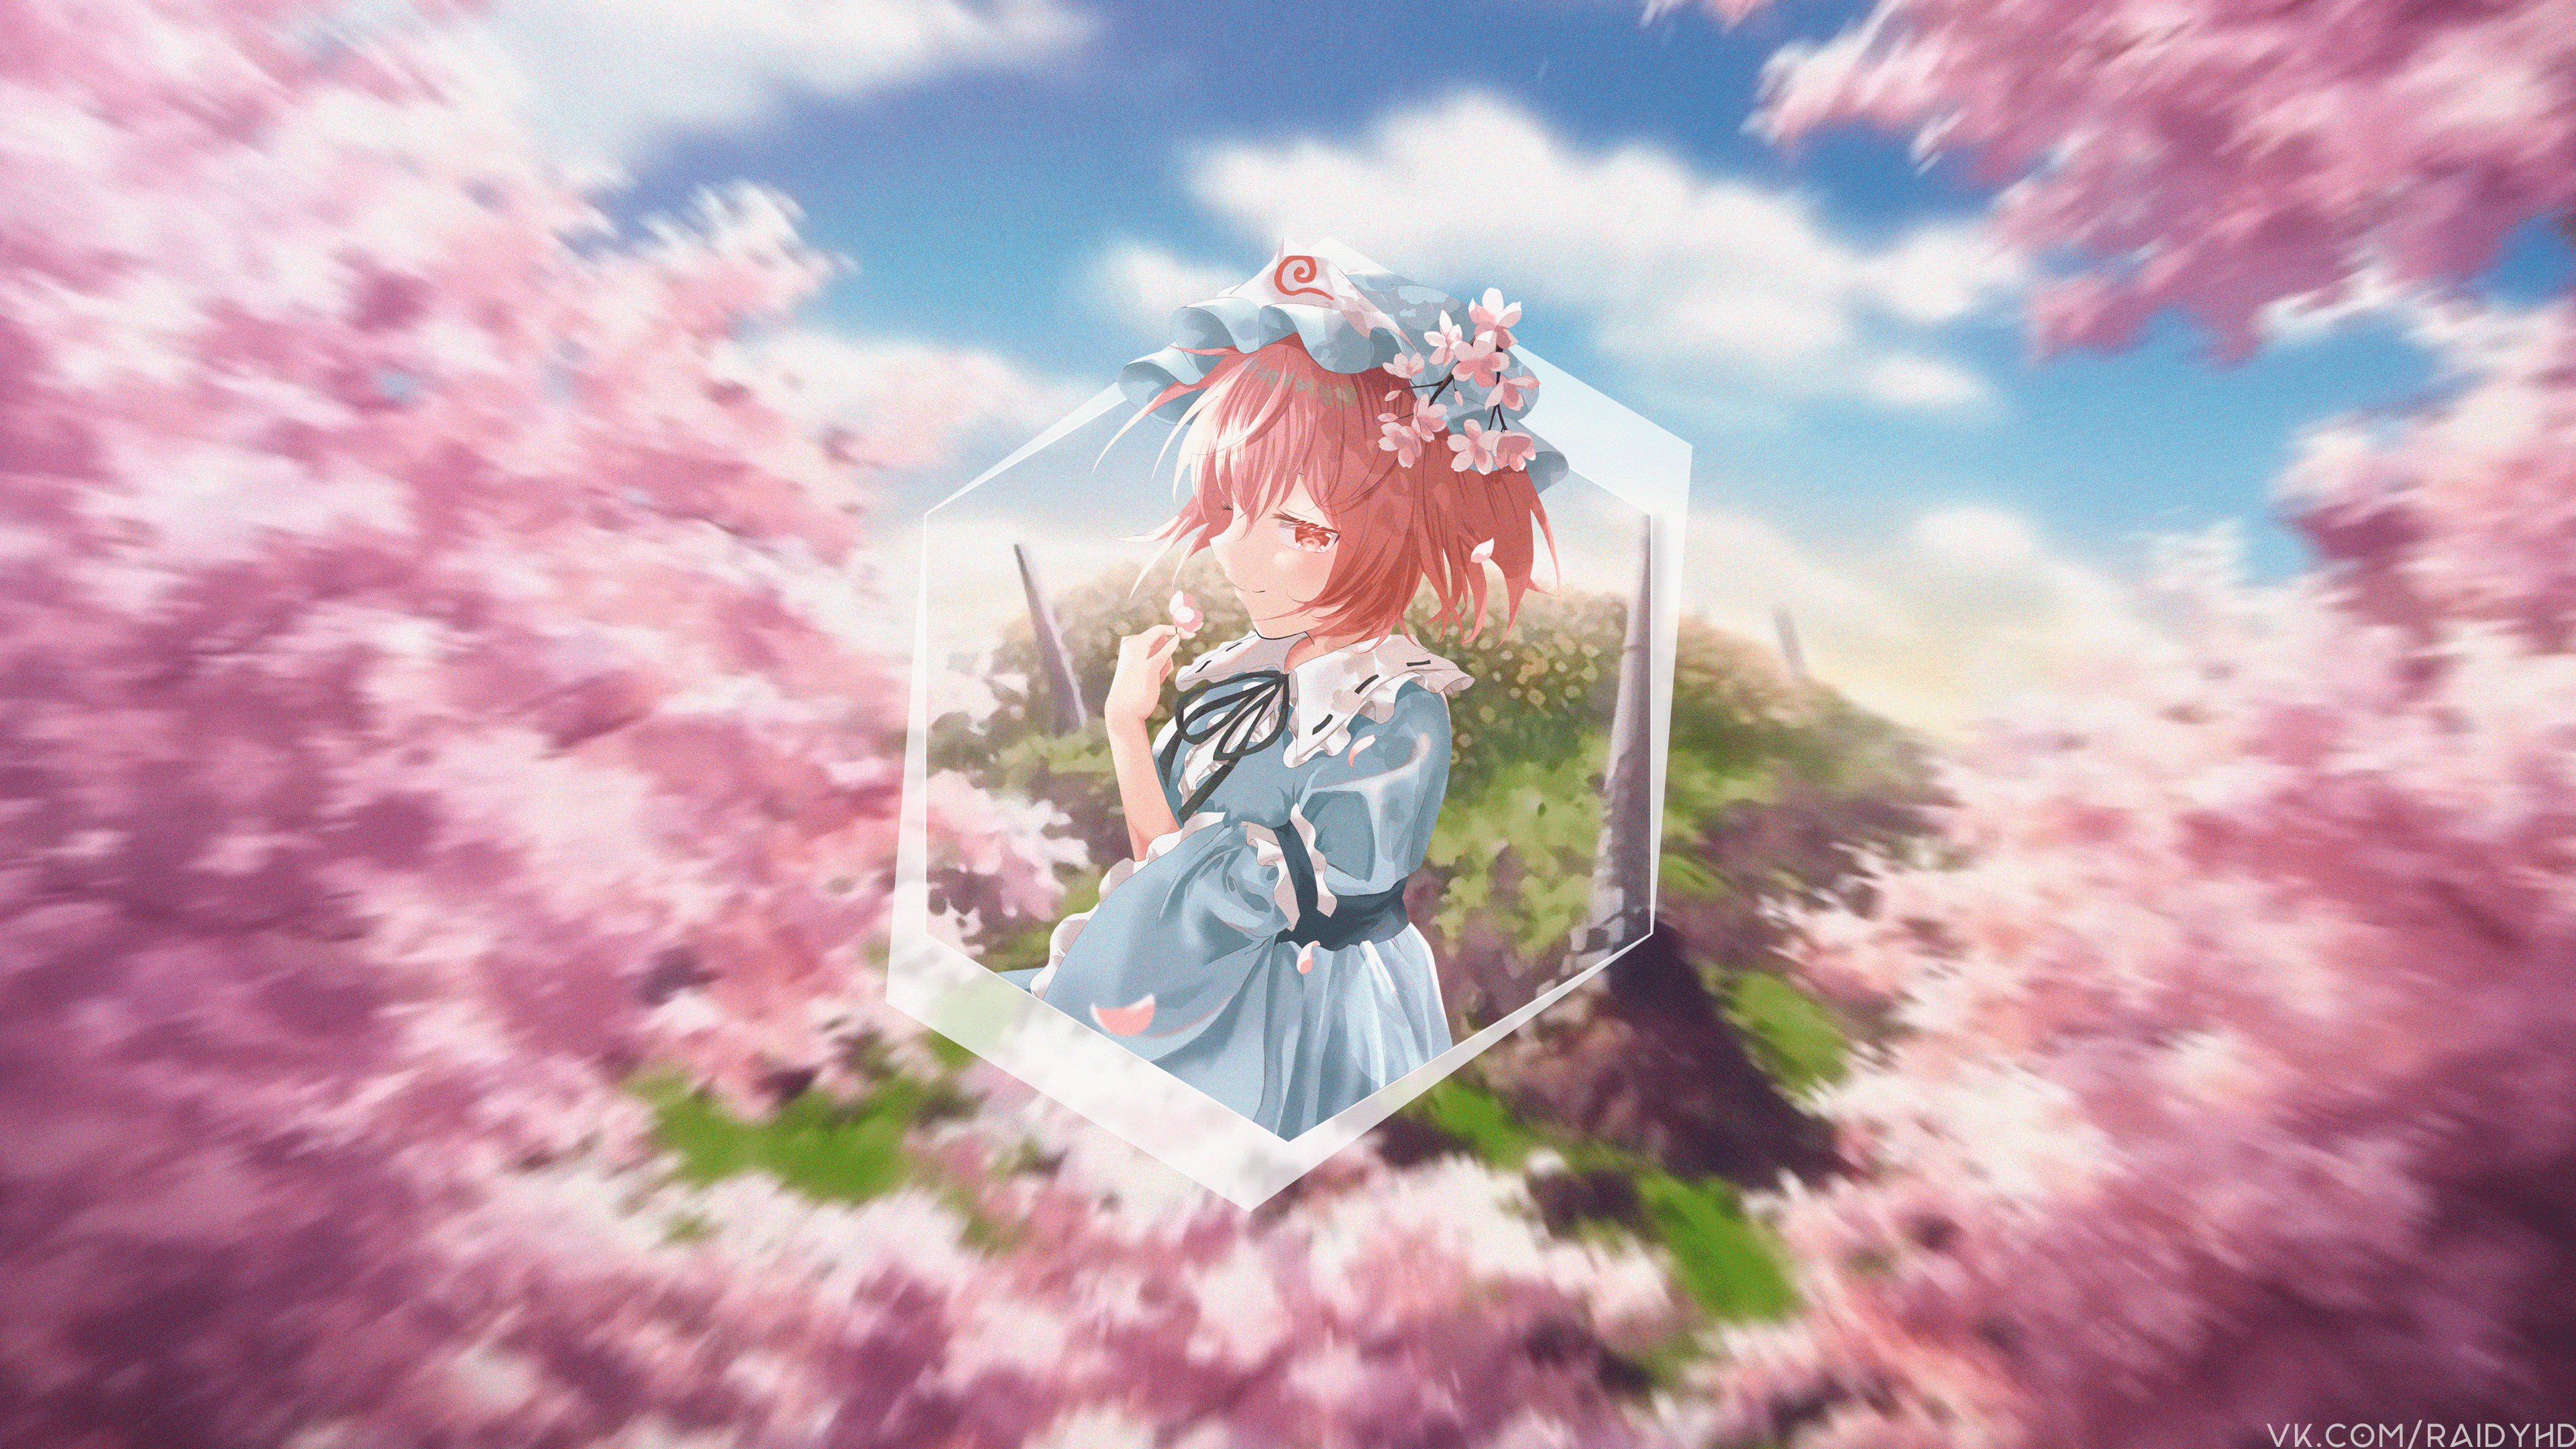 Anime Anime Girls Picture In Picture Touhou Saigyouji Yuyuko Cherry Blossom 3840x2160